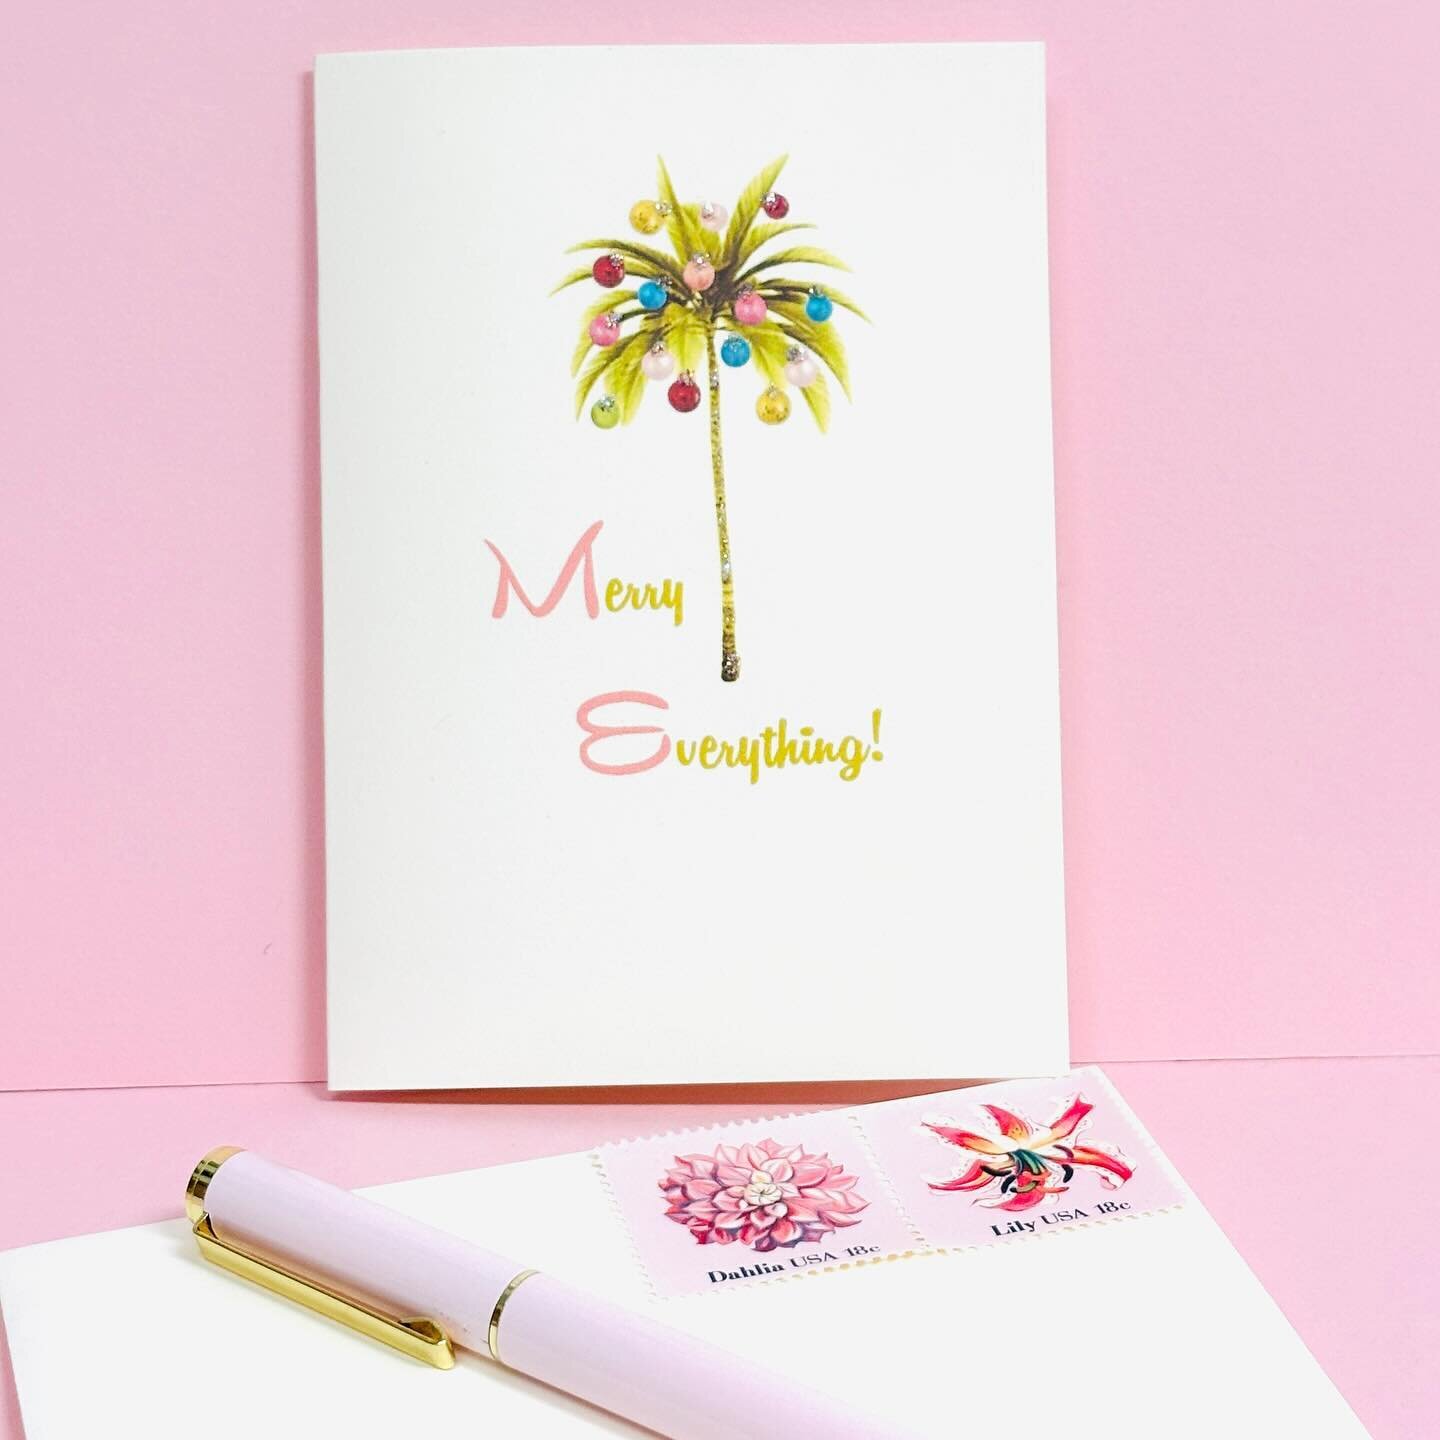 Hard to believe it's almost this time of year again! 🌴 Keeping it simple.  #holidaycards #sendacardnotjustatext 🎄